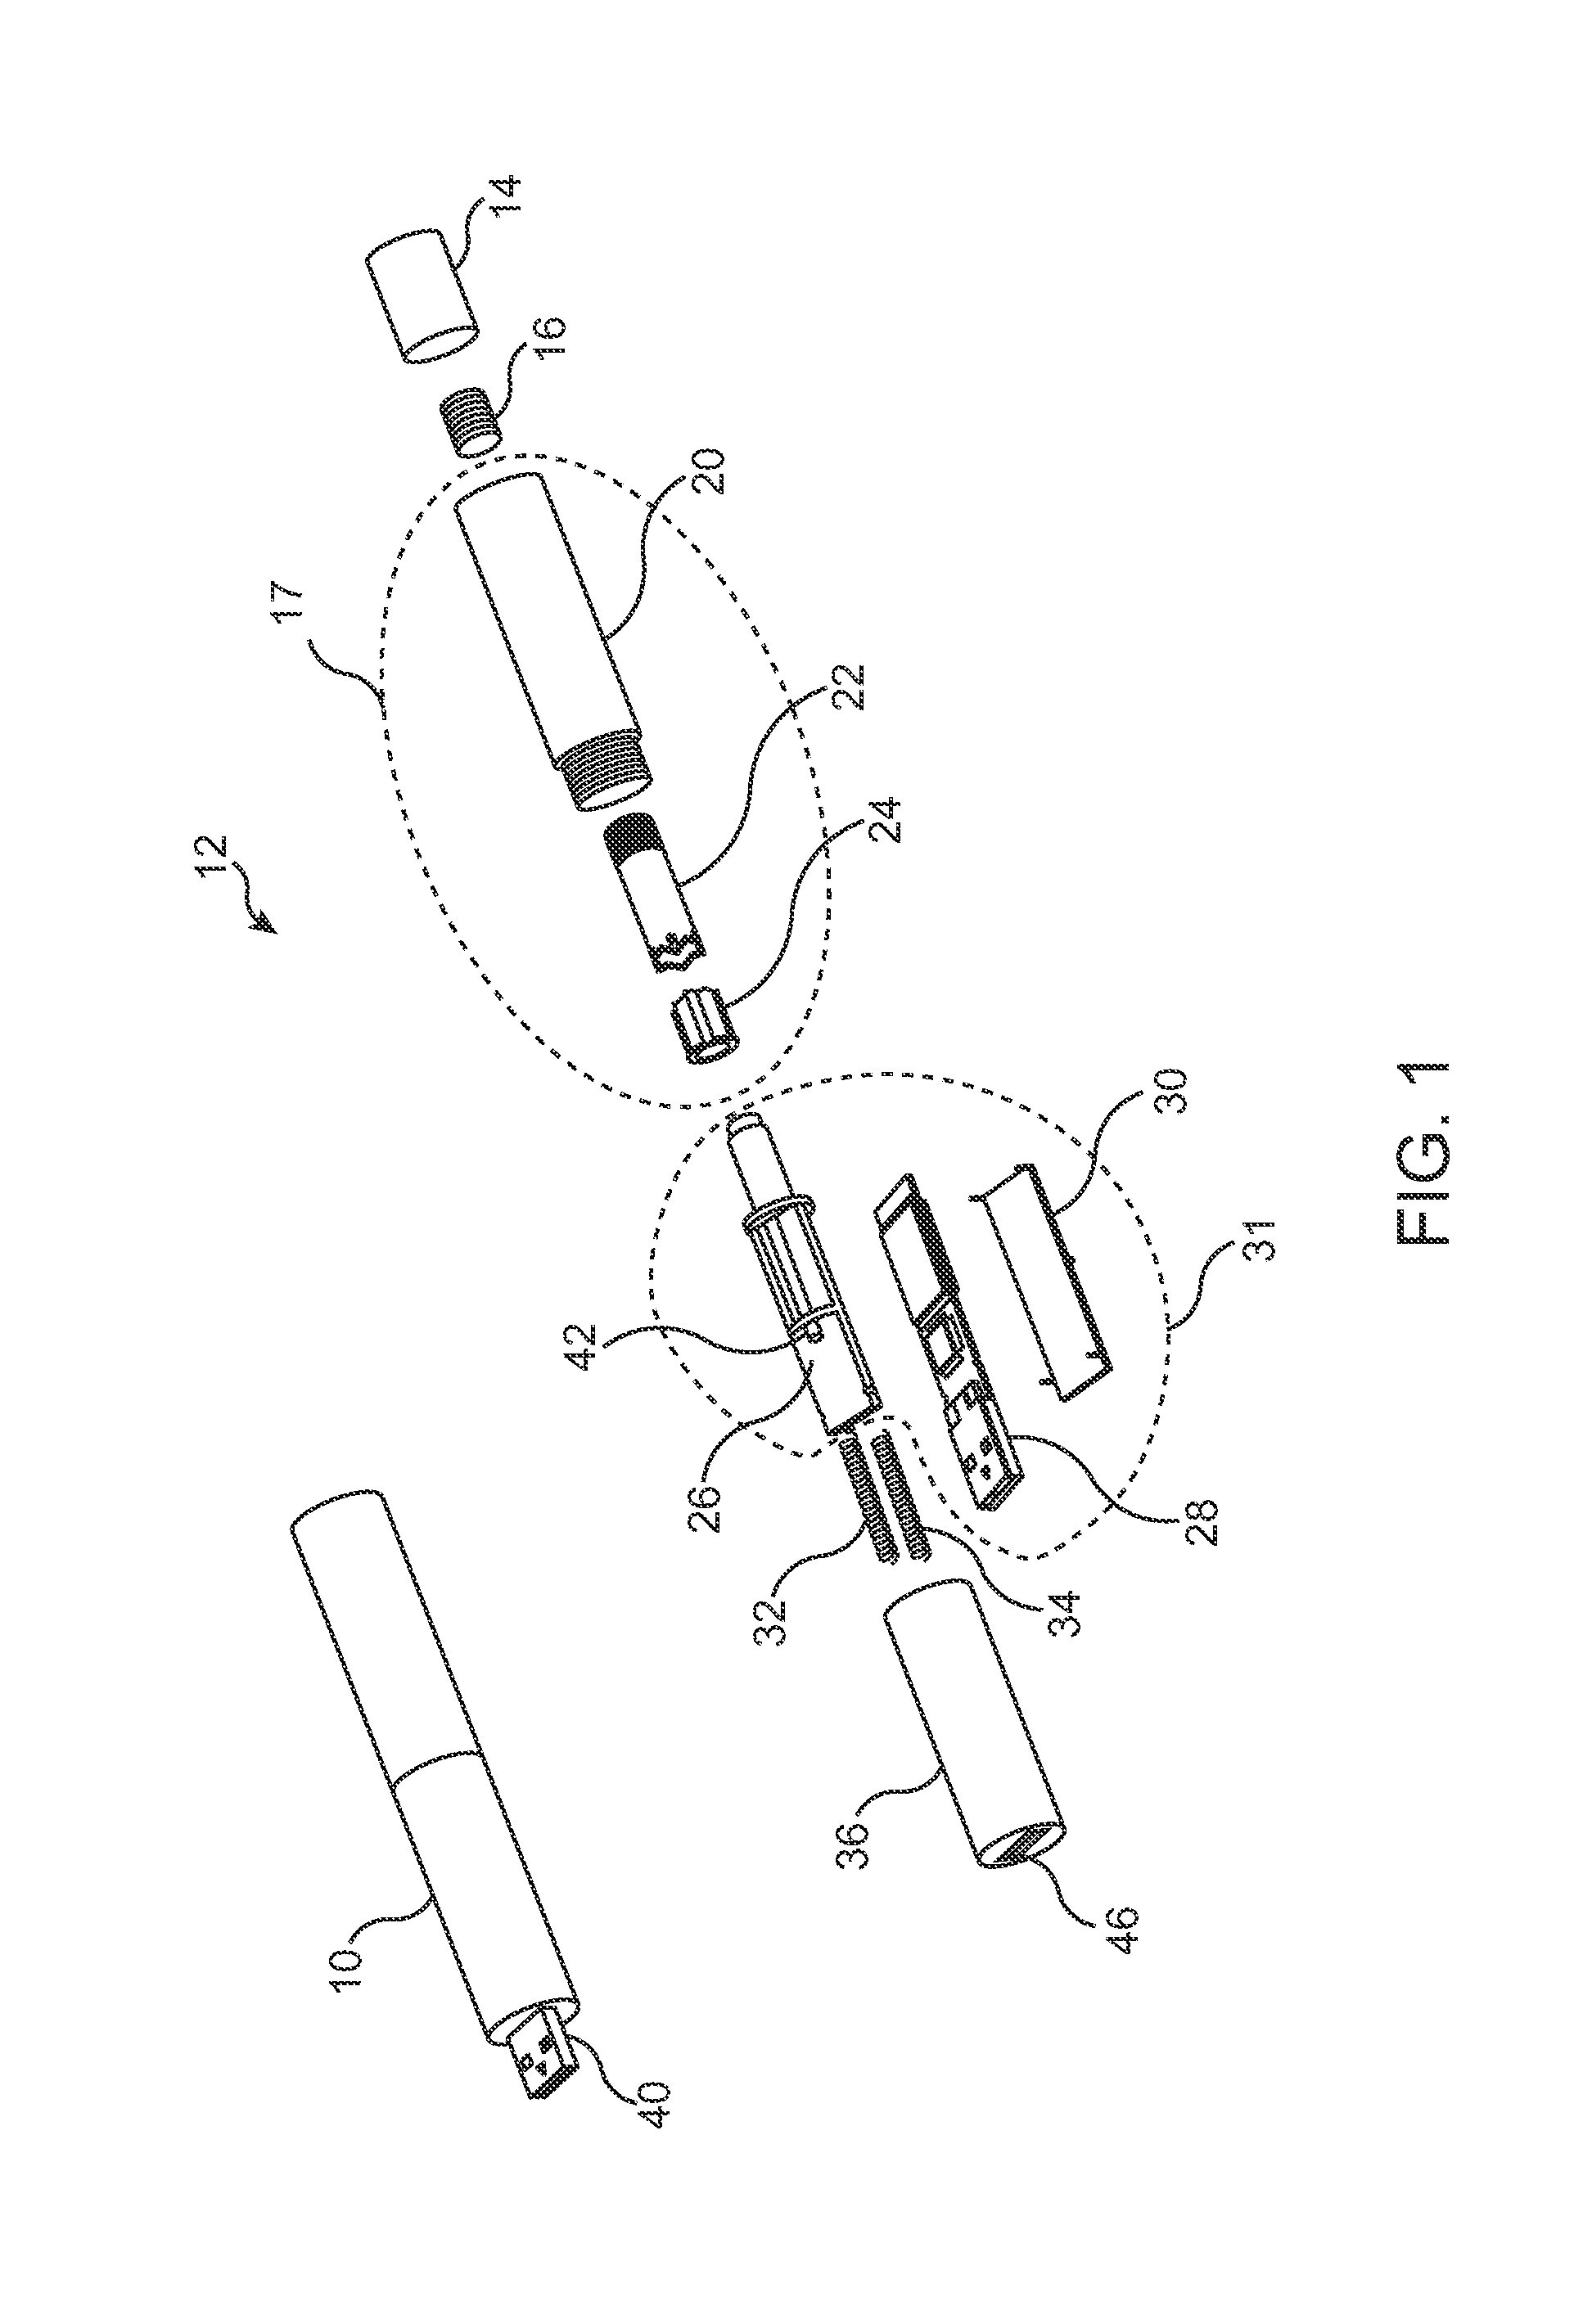 Universal serial bus flash drive with deploying and retracting functionalities